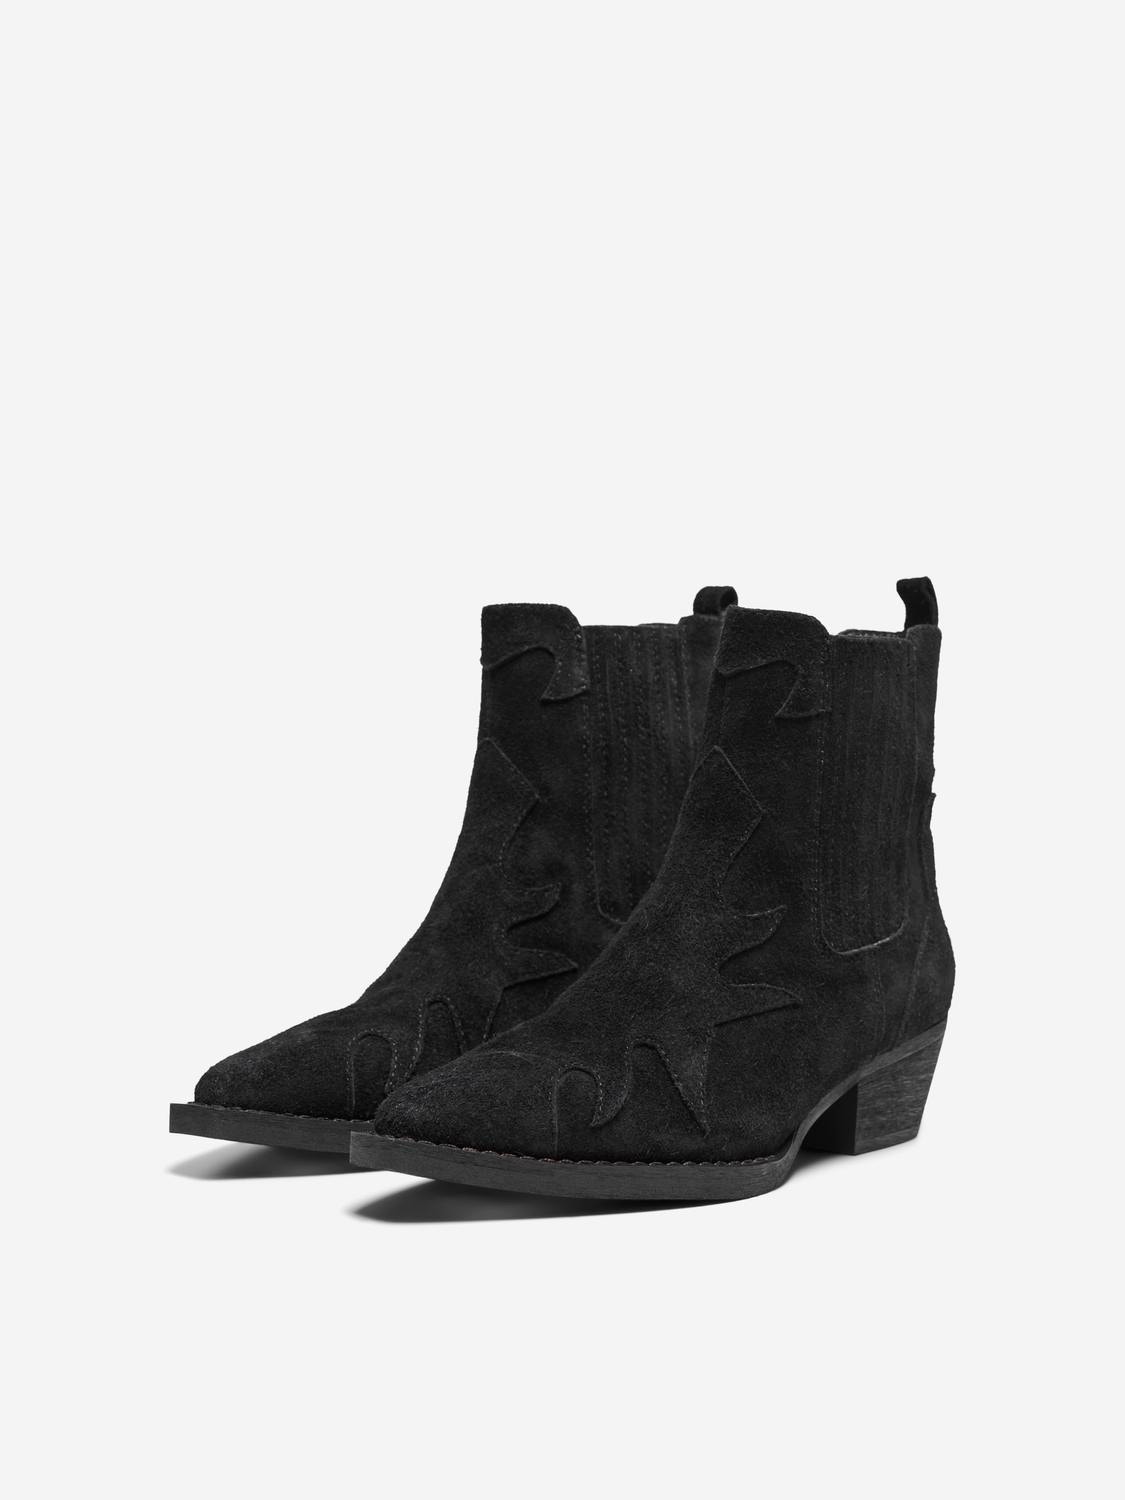 ONLY Bottes Bout pointu -Black - 15287492